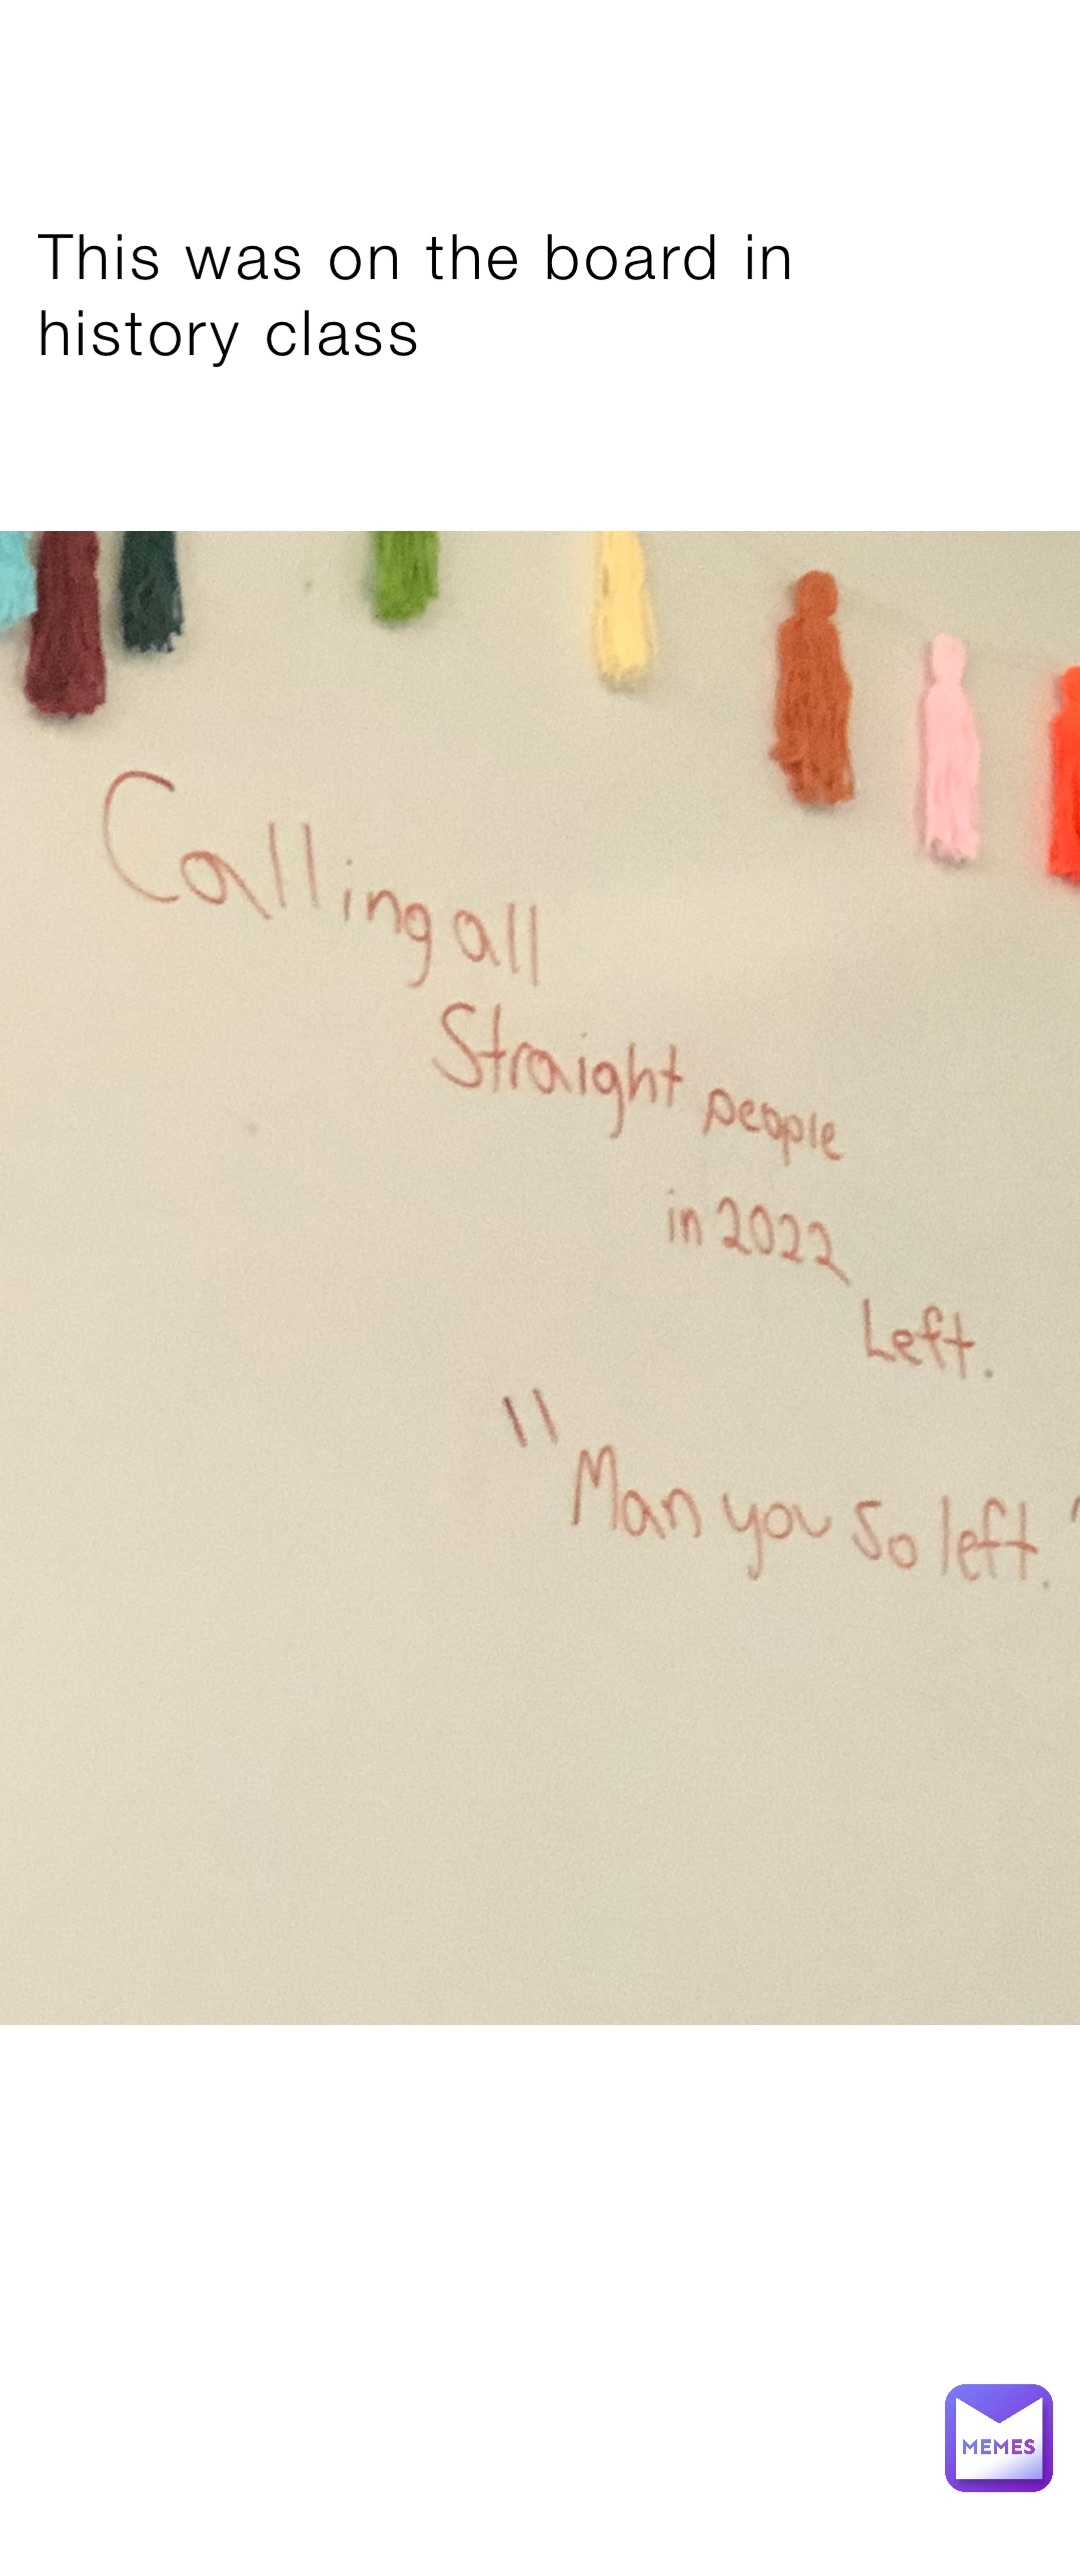 This was on the board in history class